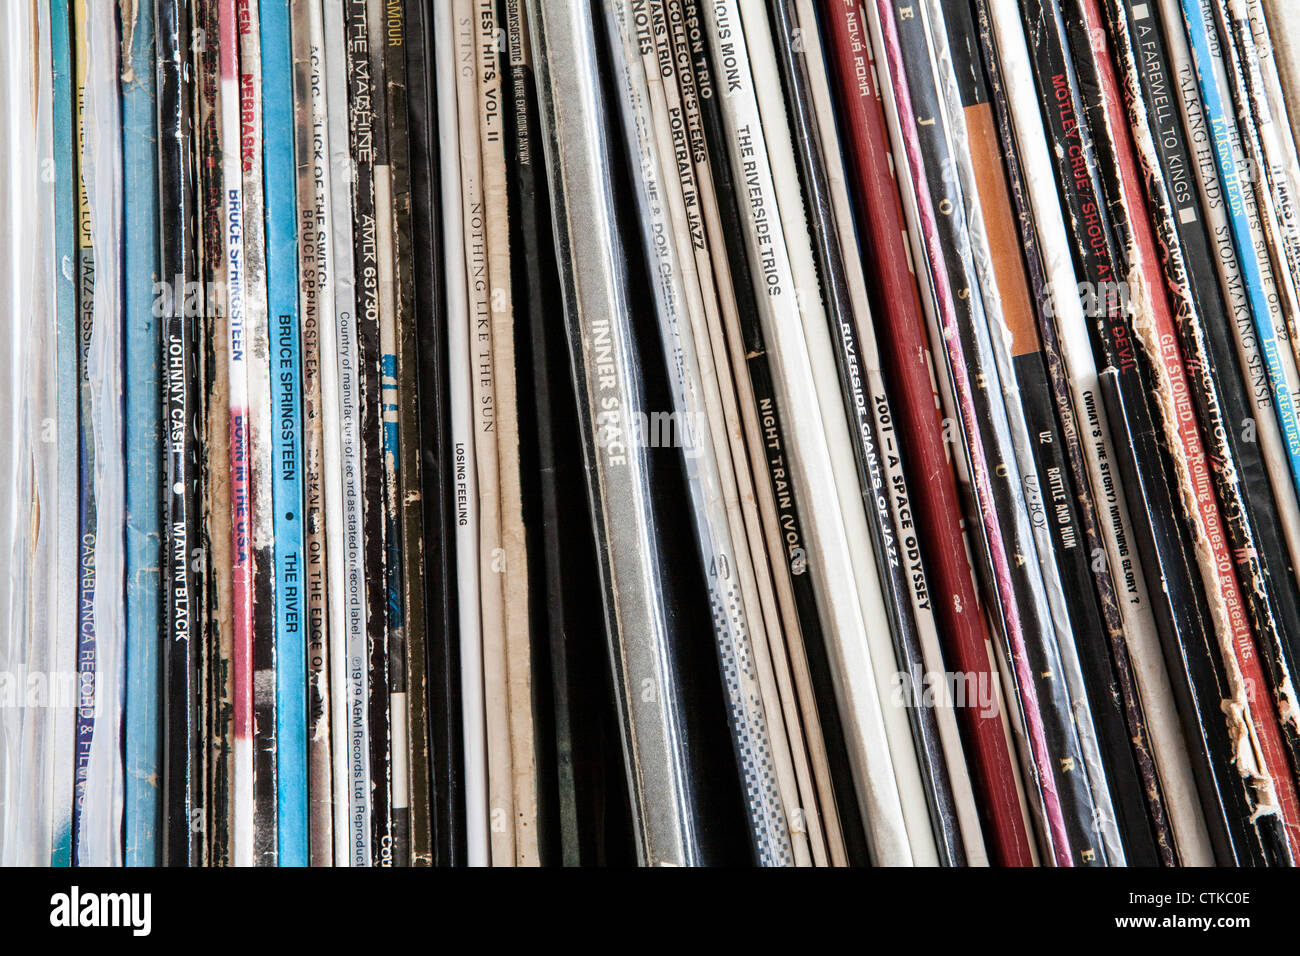 collection-of-vinyl-records-on-a-shelf-C